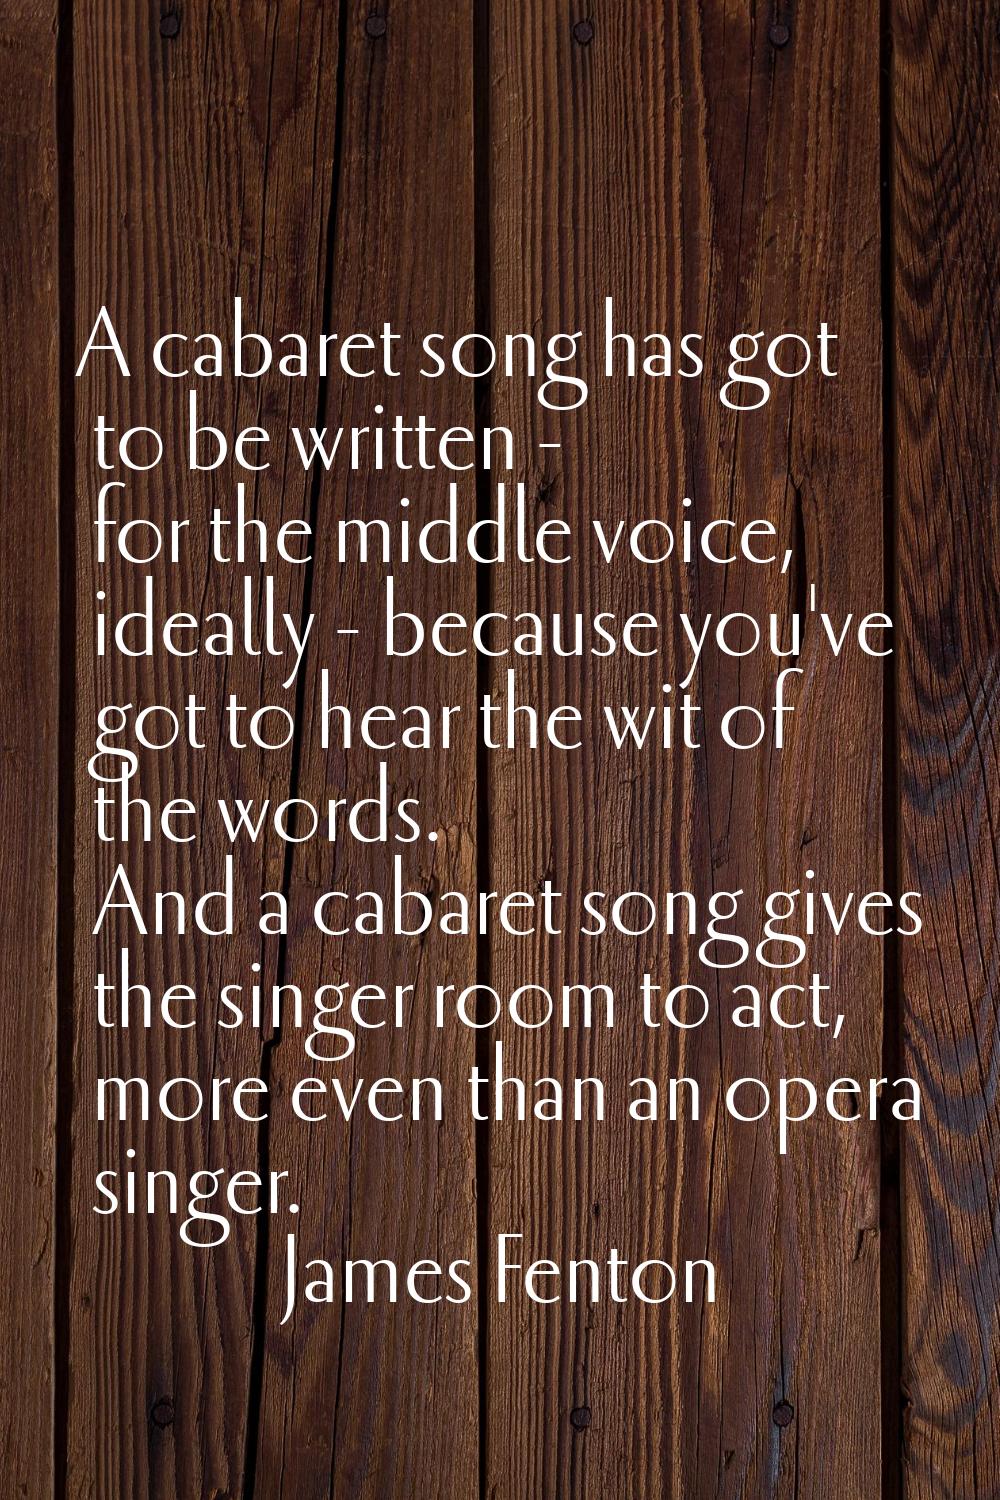 A cabaret song has got to be written - for the middle voice, ideally - because you've got to hear t